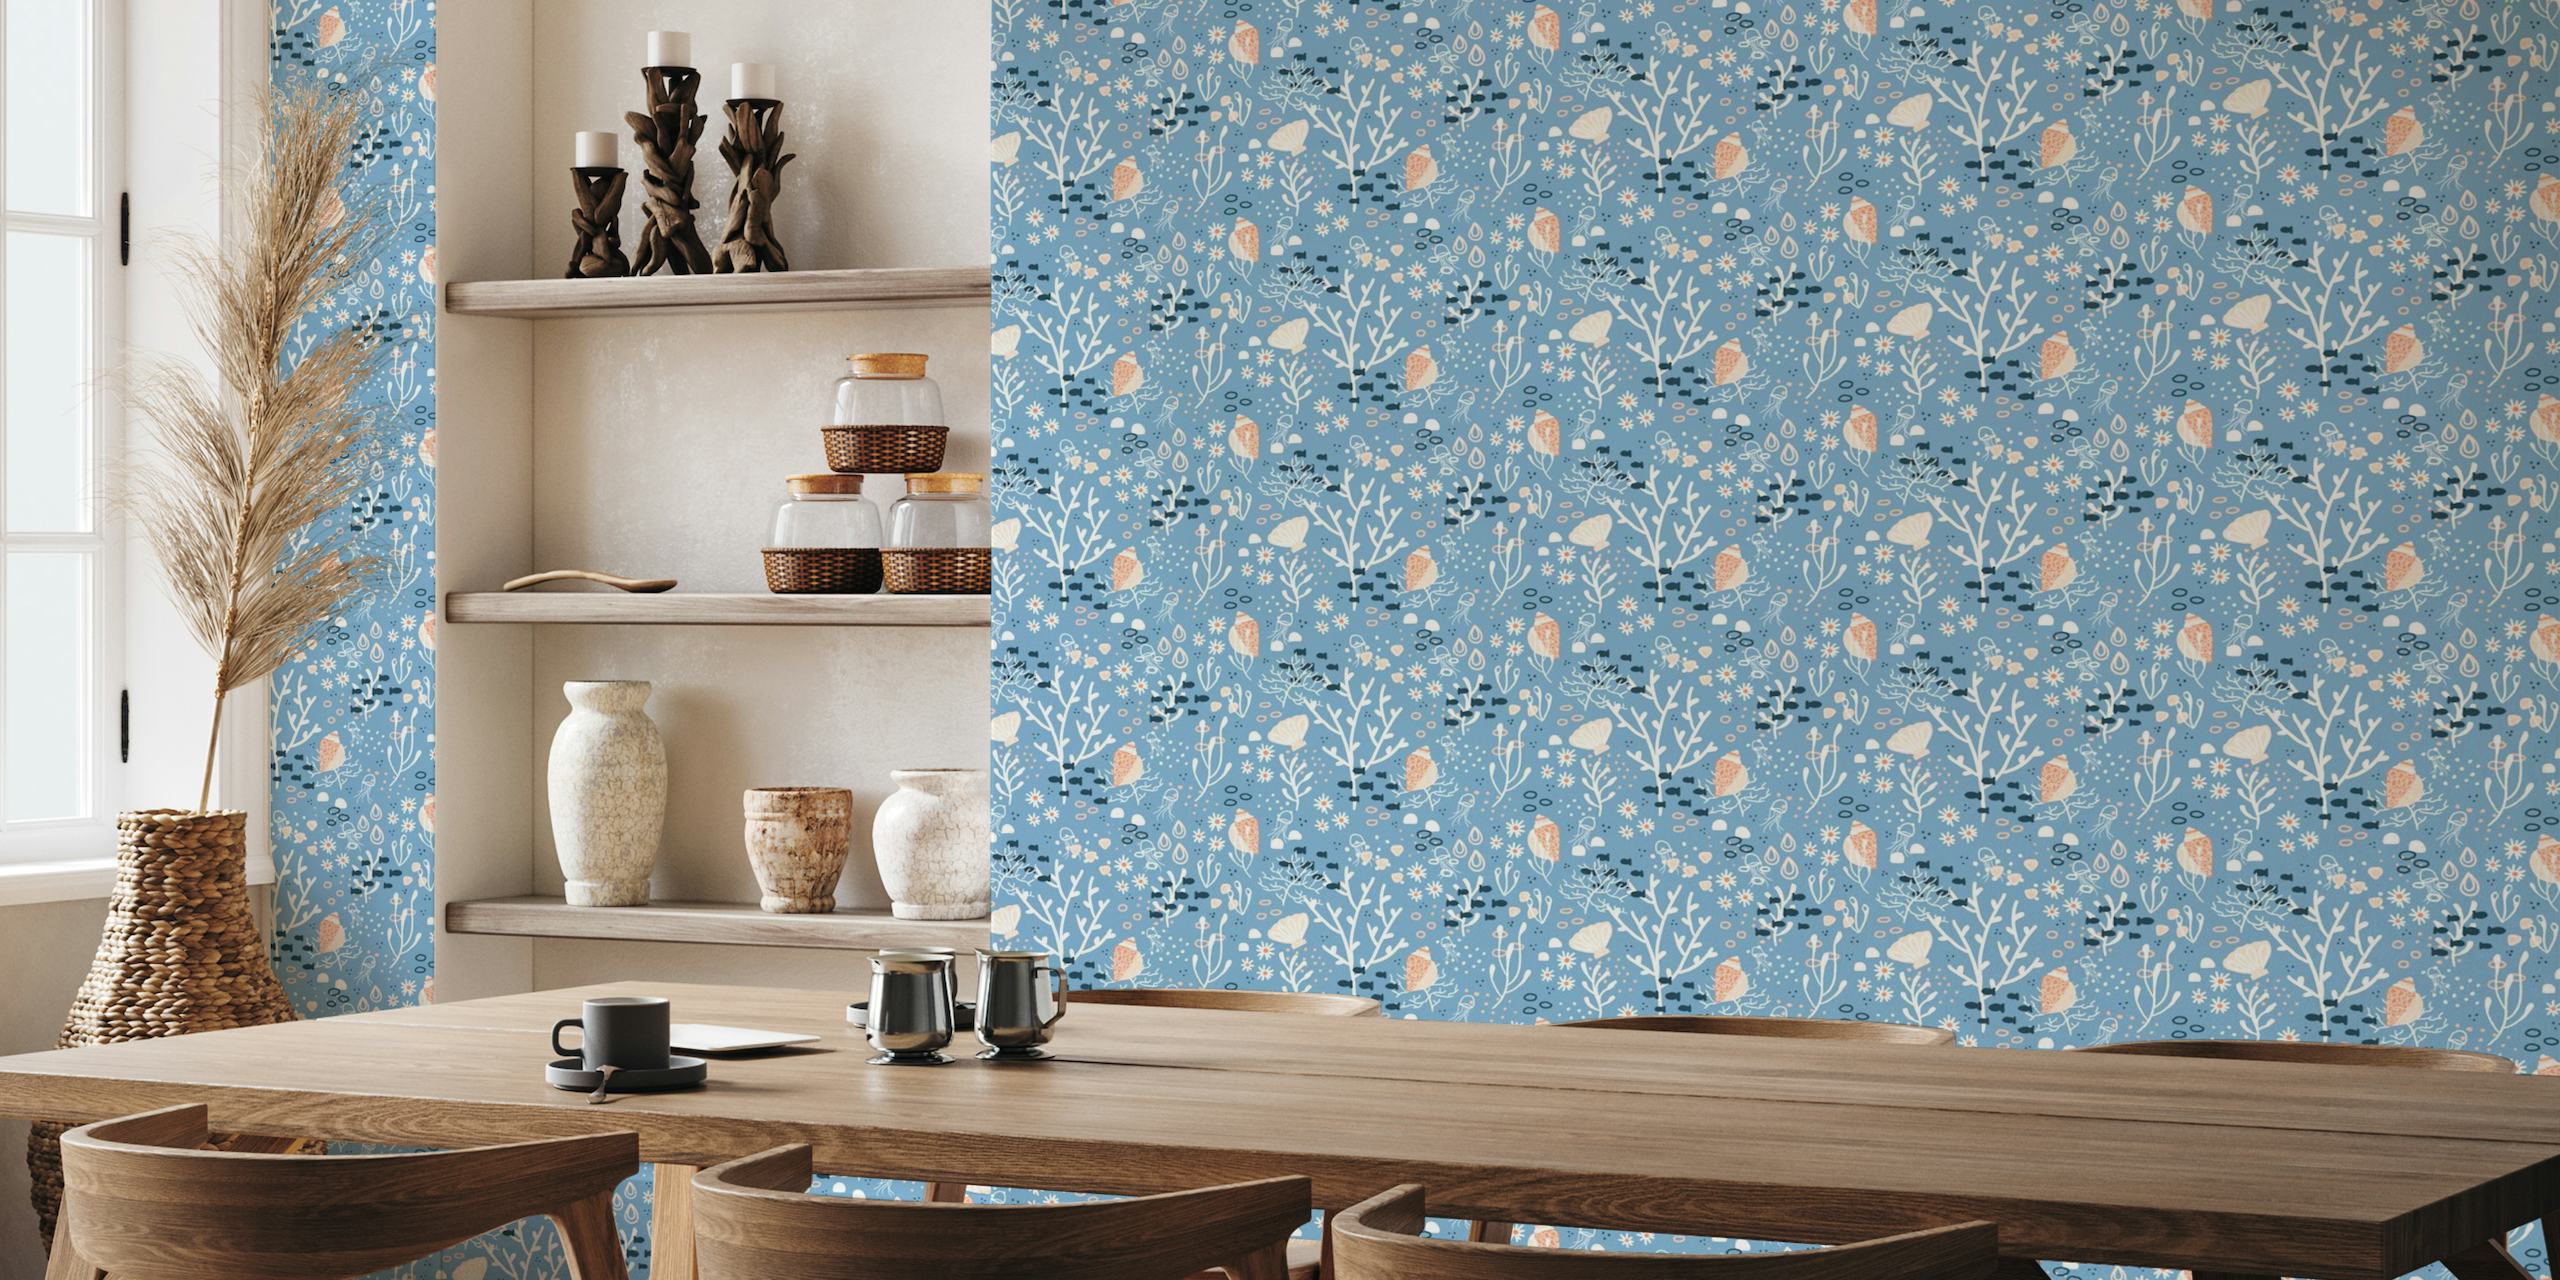 Illustrative seashell pattern wall mural with oceanic elements in pastel colors